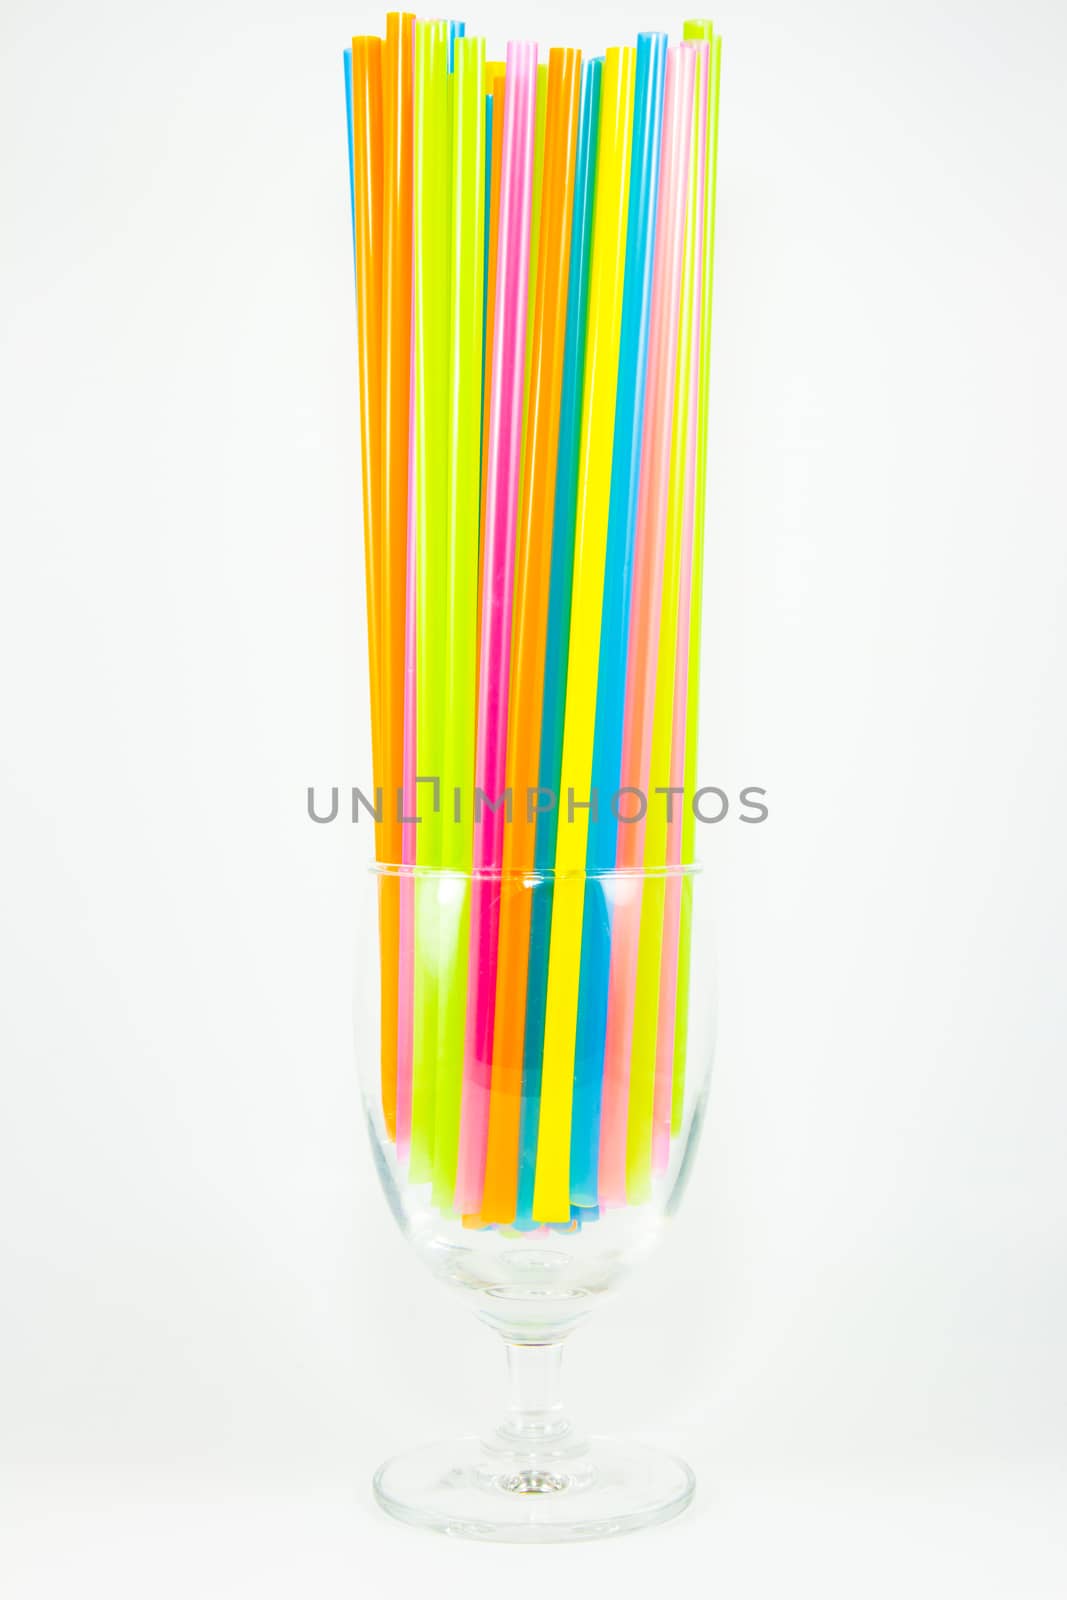 Colorful drinking straws in glass isolated on white background by kasinv